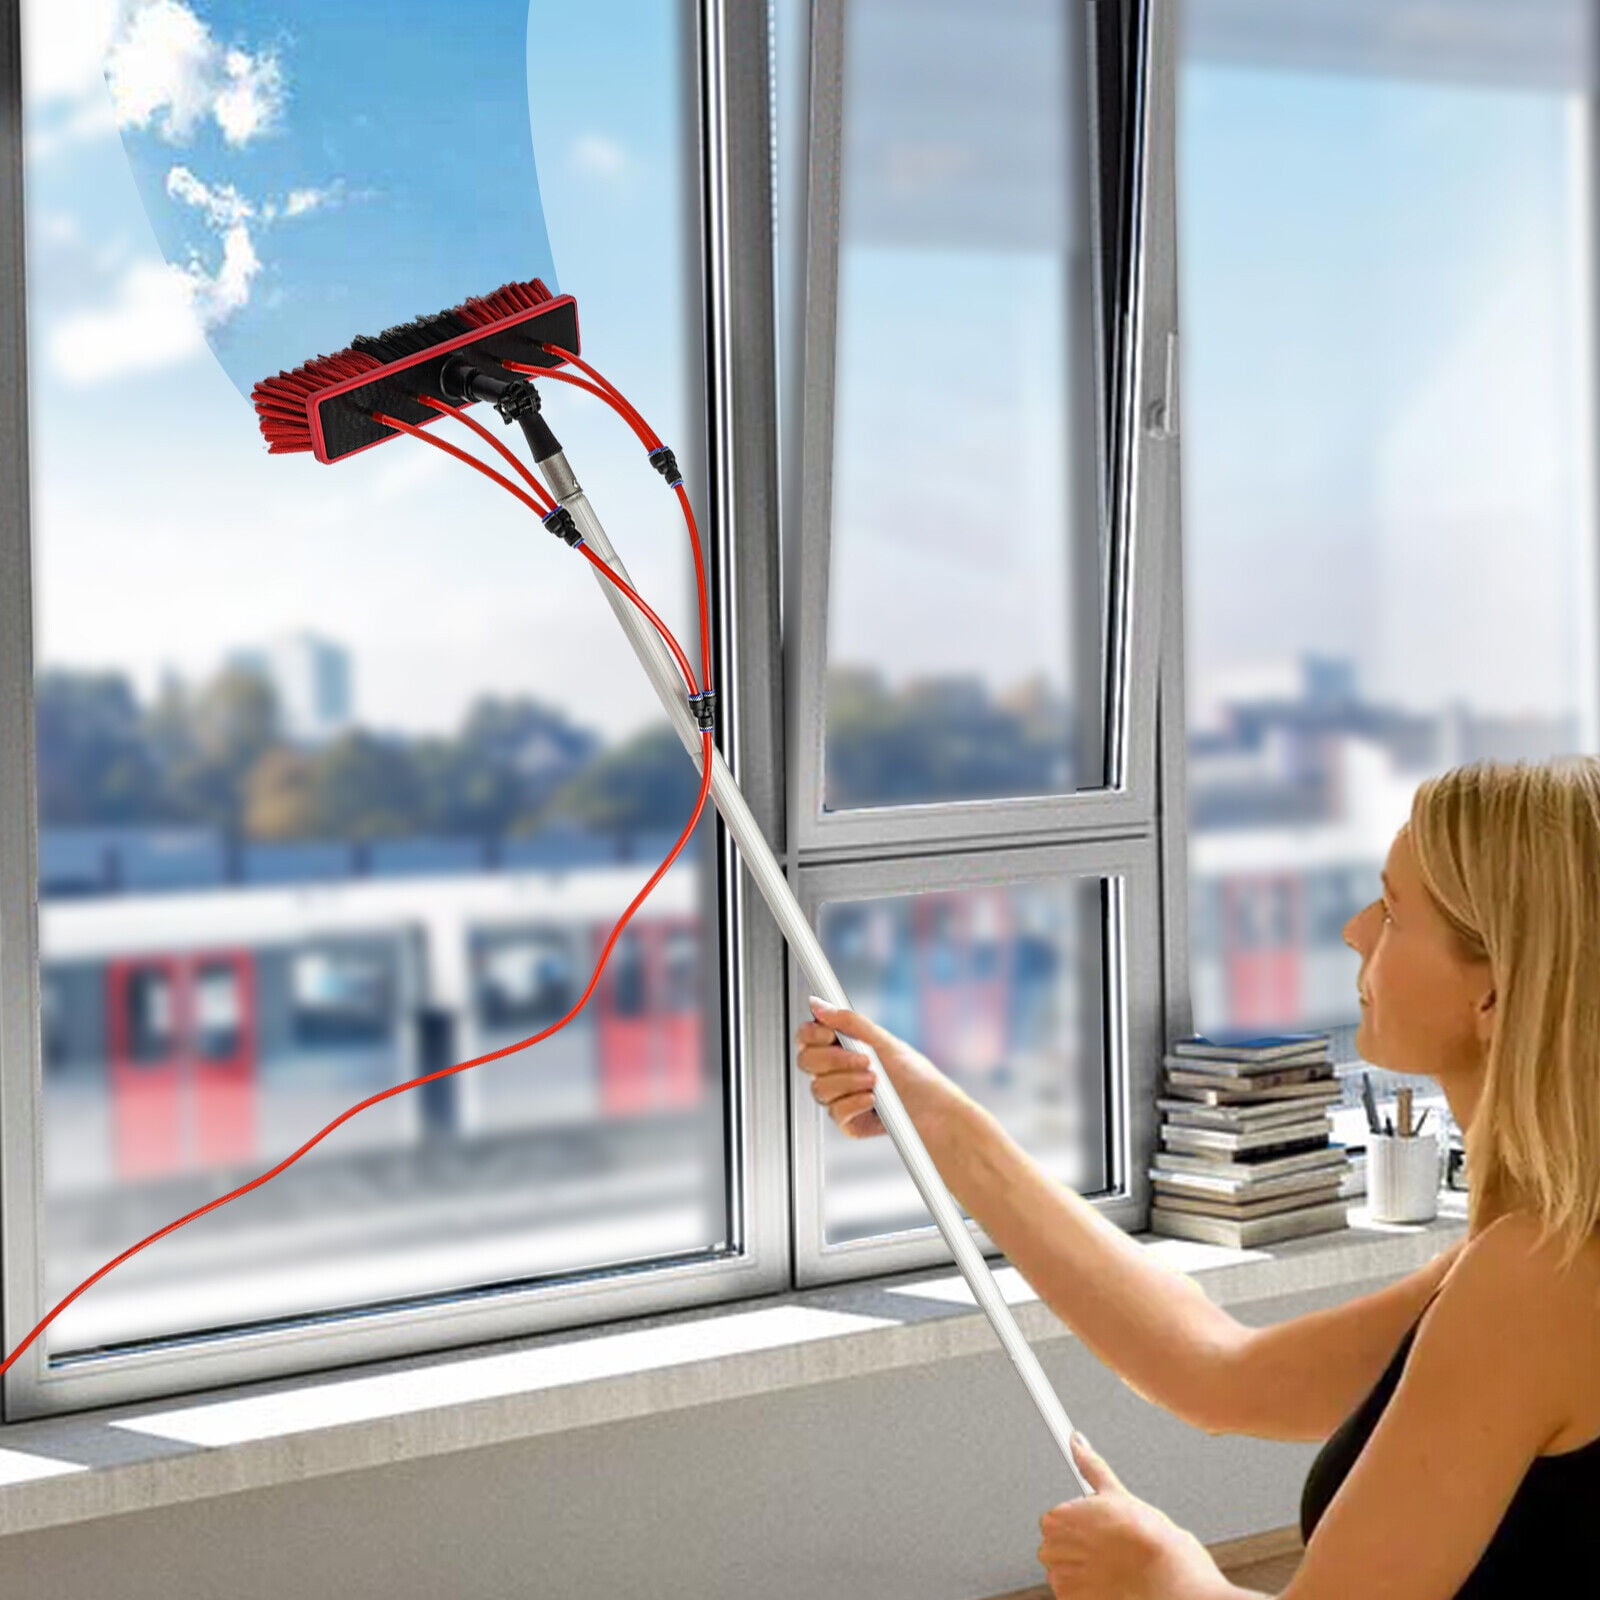 Squeegee Window Cleaner,Baban 2 in 1 Window Cleaning Tool with